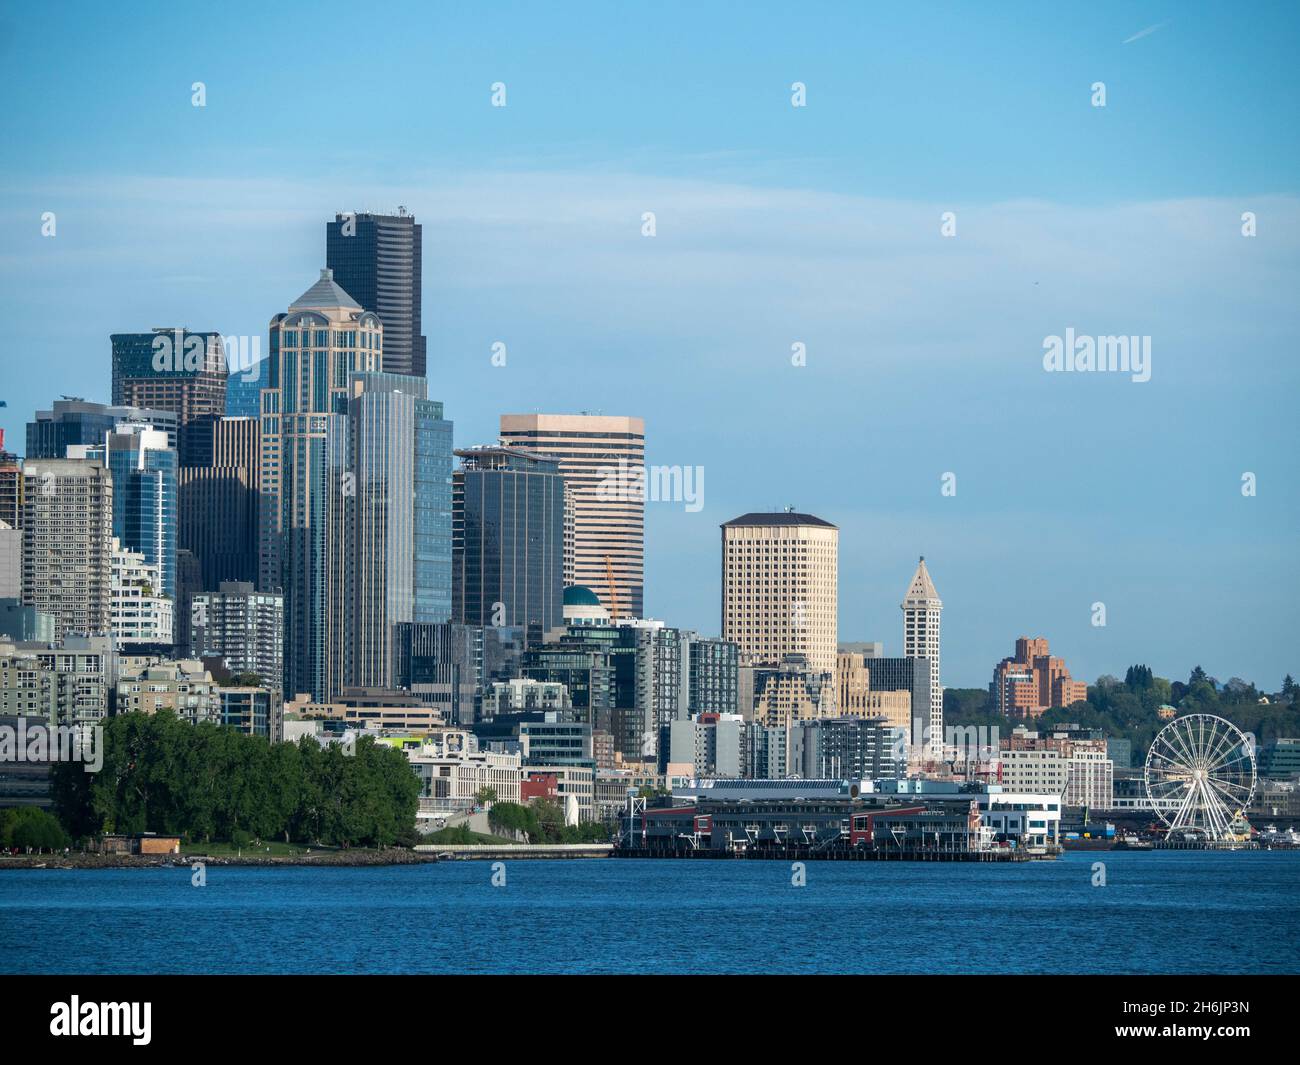 View of downtown Seattle from the harbor, Seattle, Washington State, United States of America, North America Stock Photo